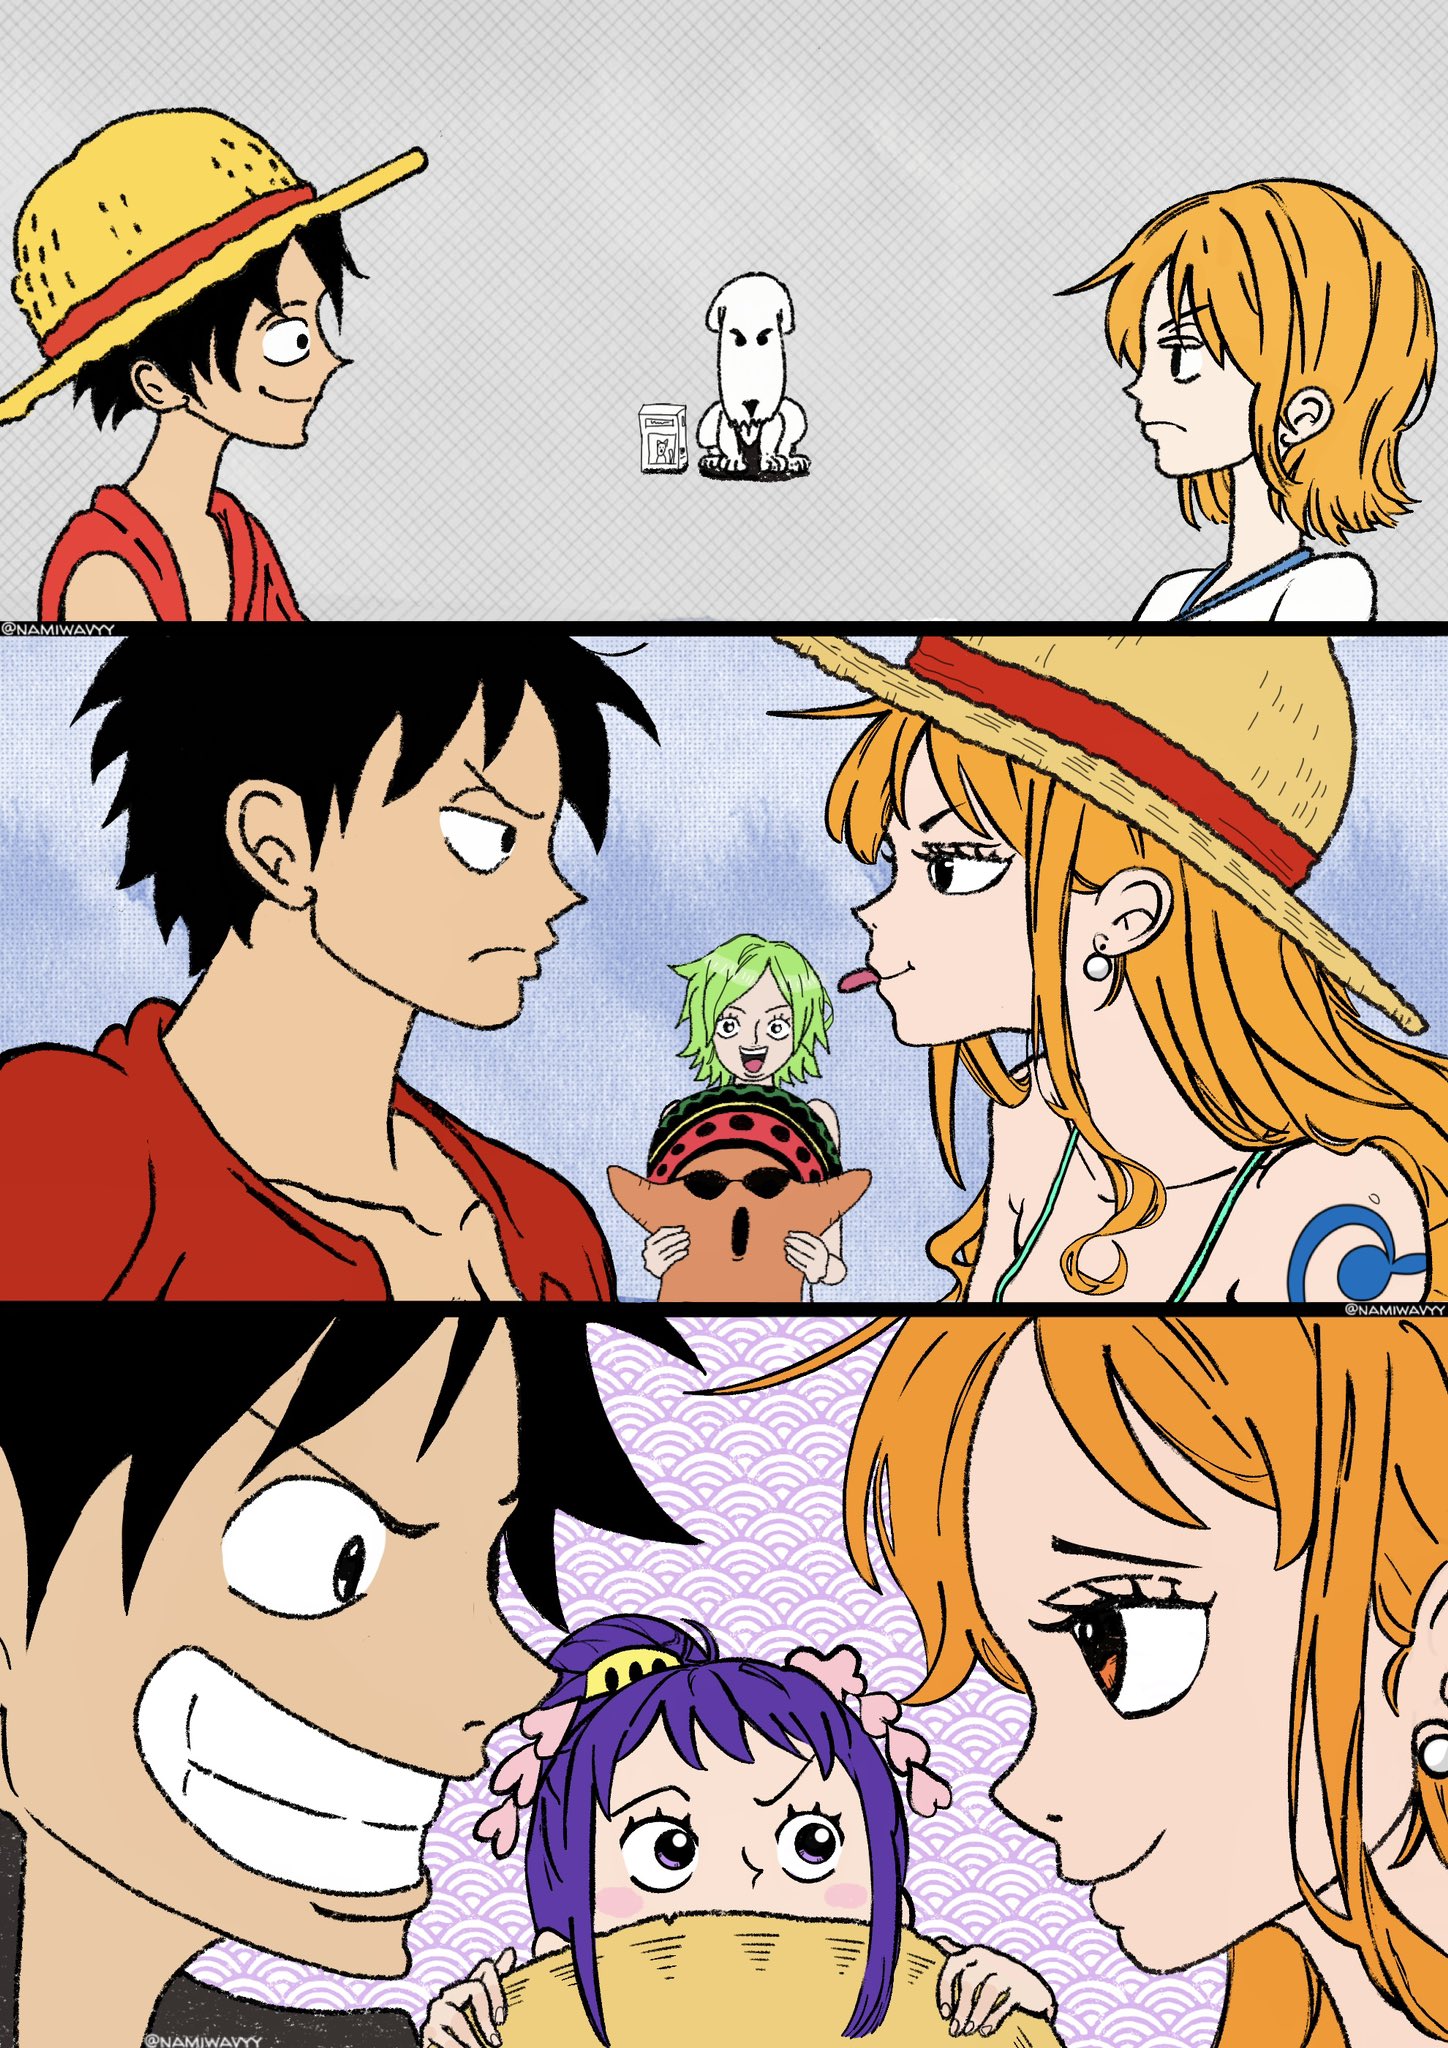 Captain and the Navigator 👒🍊 #Onepiece #Luffy #Nami